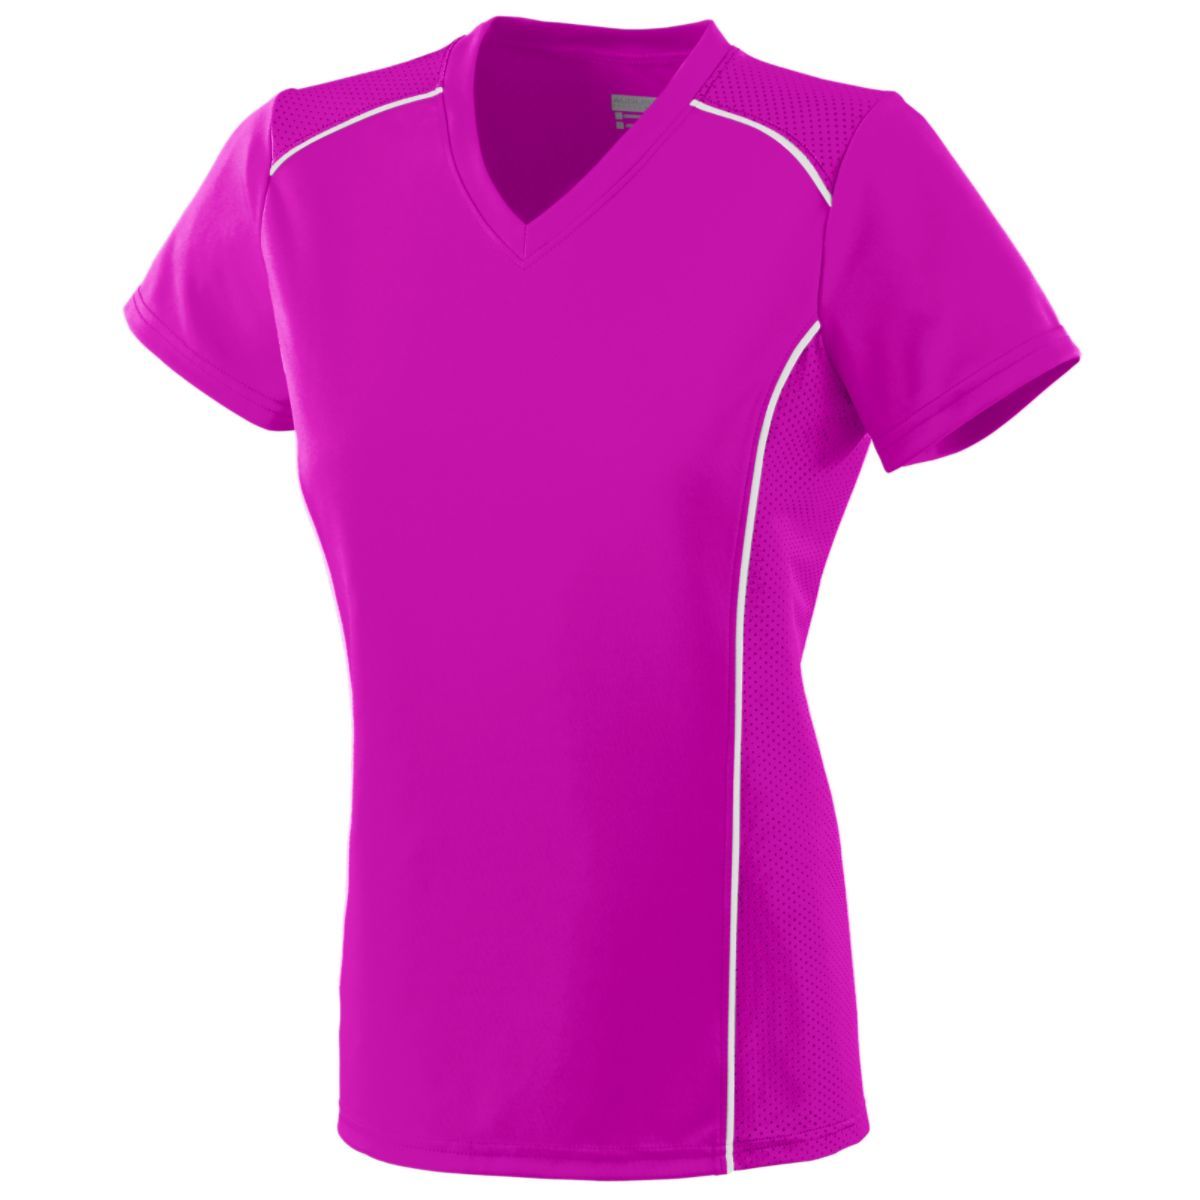 Augusta Sportswear Girls Winning Streak Jersey in Power Pink/White  -Part of the Girls, Augusta-Products, Soccer, Girls-Jersey, Shirts, All-Sports-1 product lines at KanaleyCreations.com